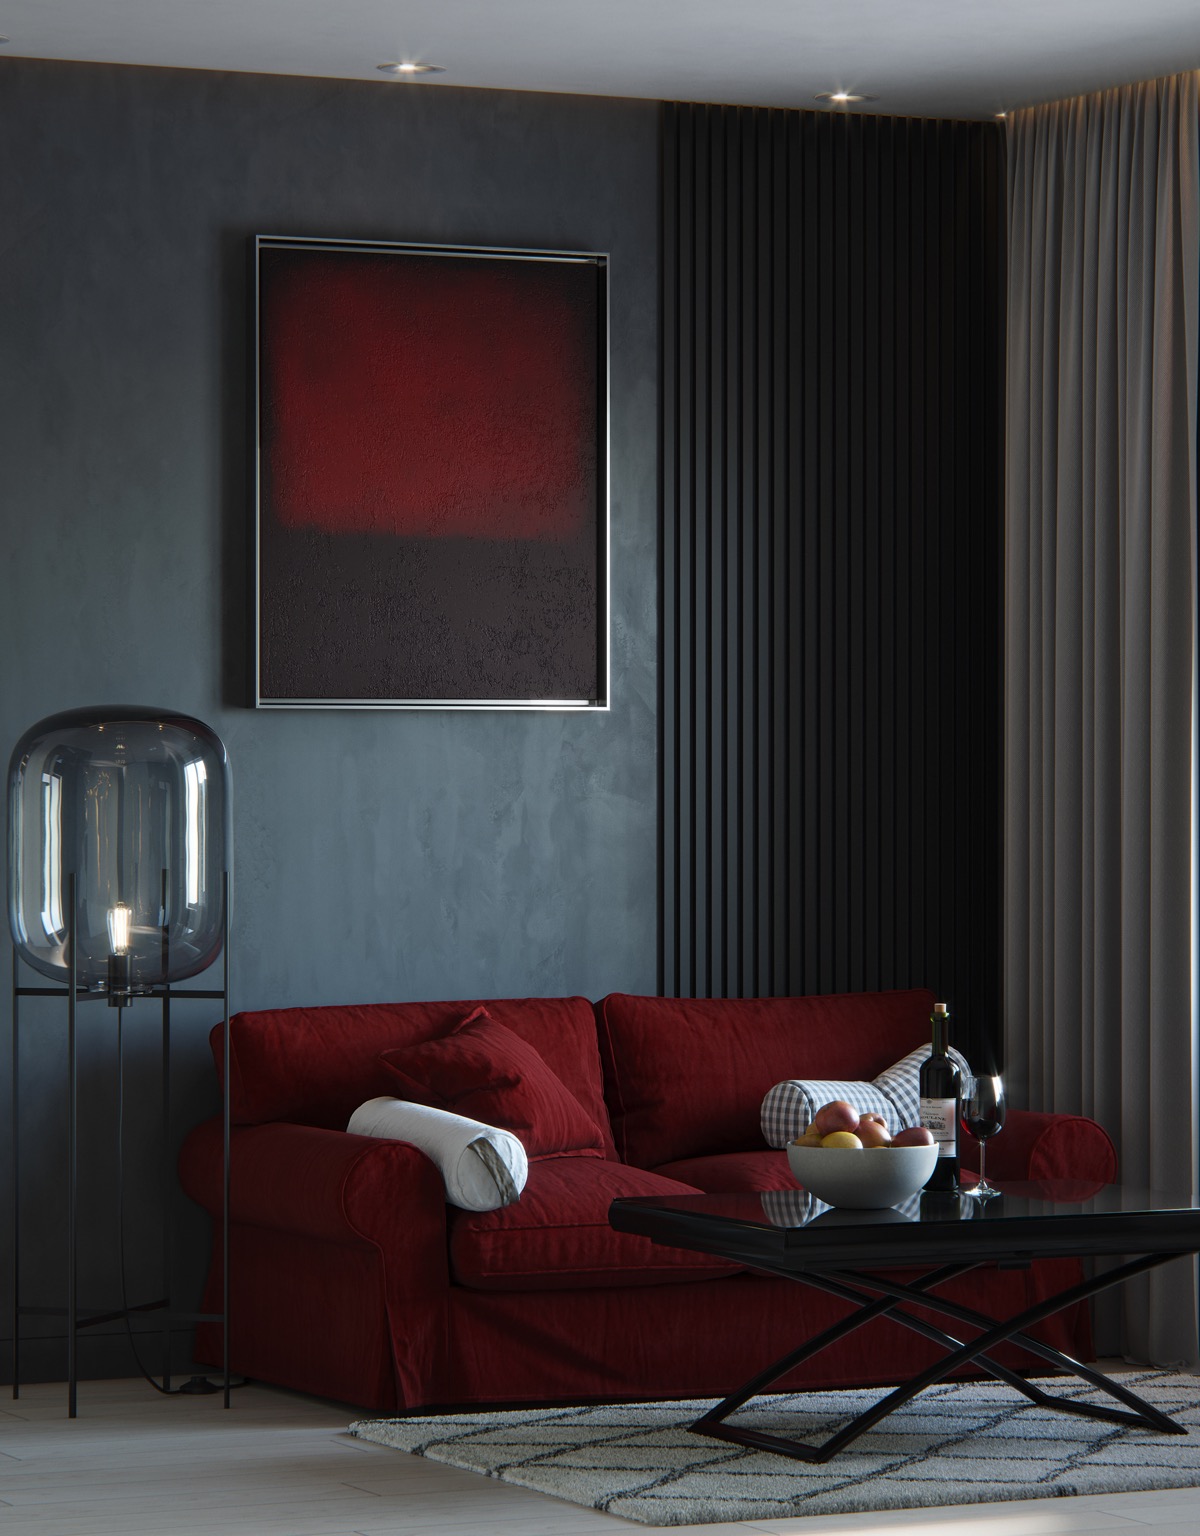 living-room-with-red-couch-600x768.jpg